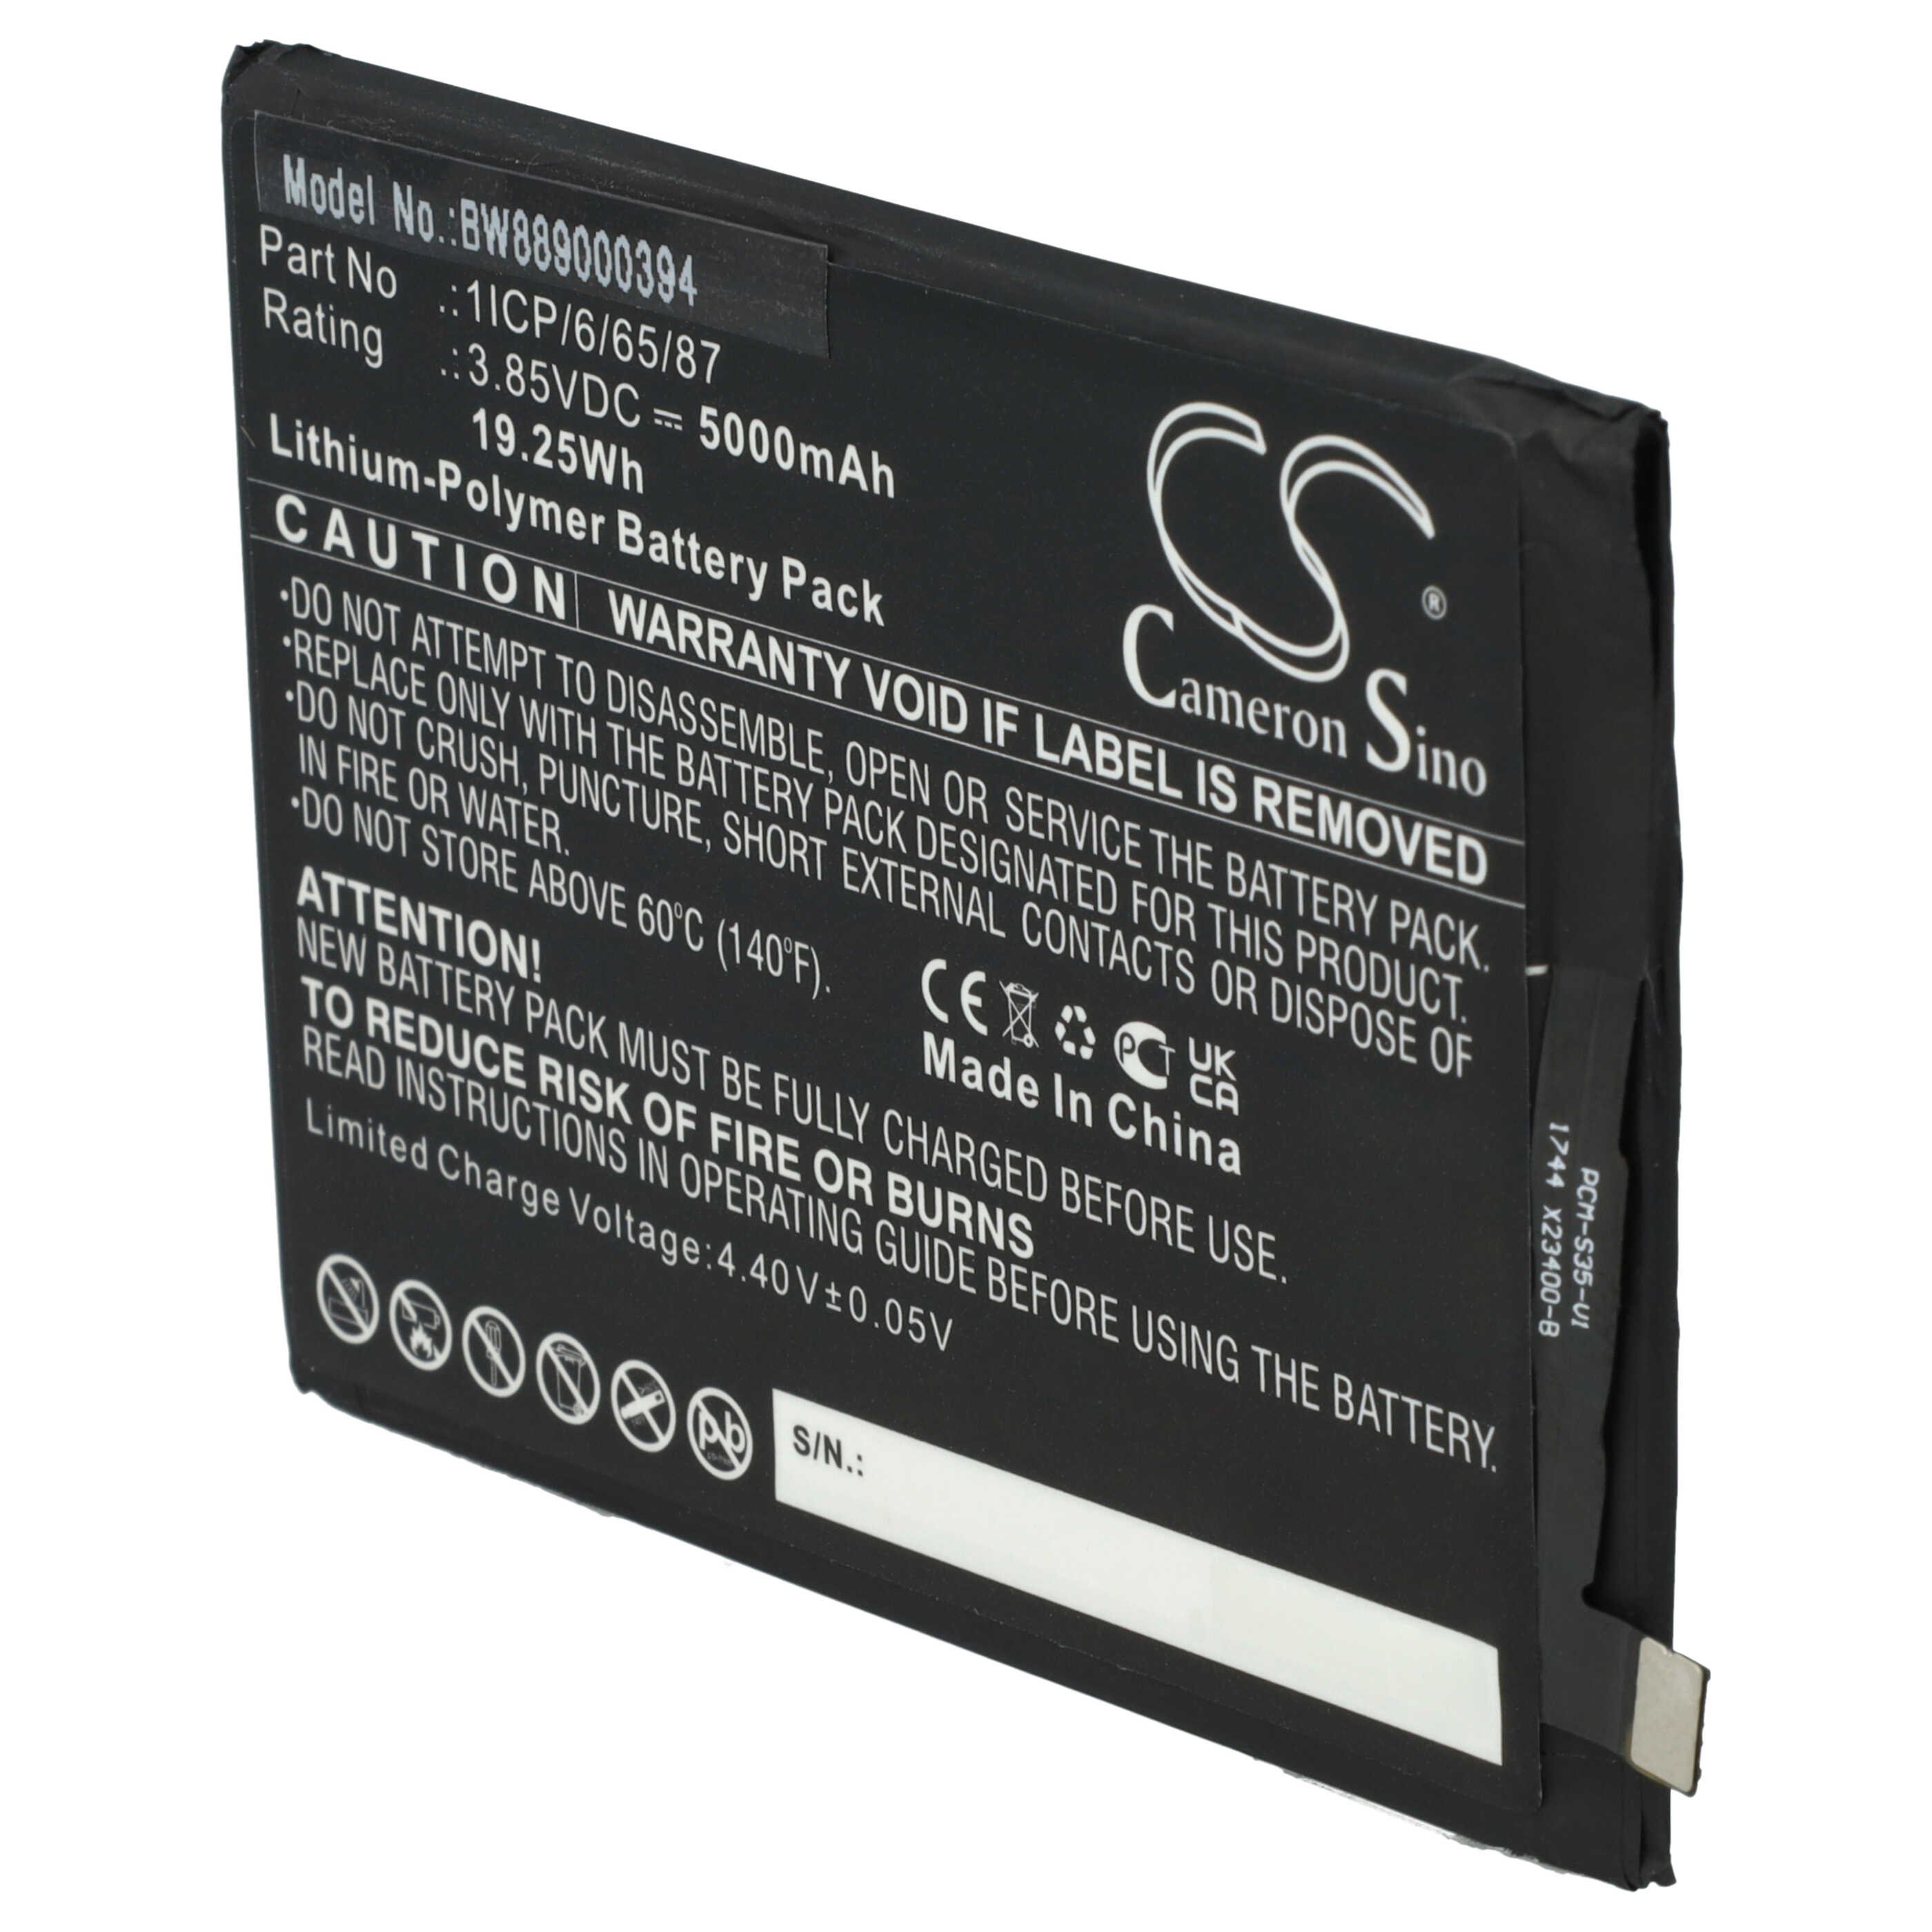 Mobile Phone Battery Replacement for Umi 1ICP/6/65/87 - 5000mAh 3.85V Li-polymer